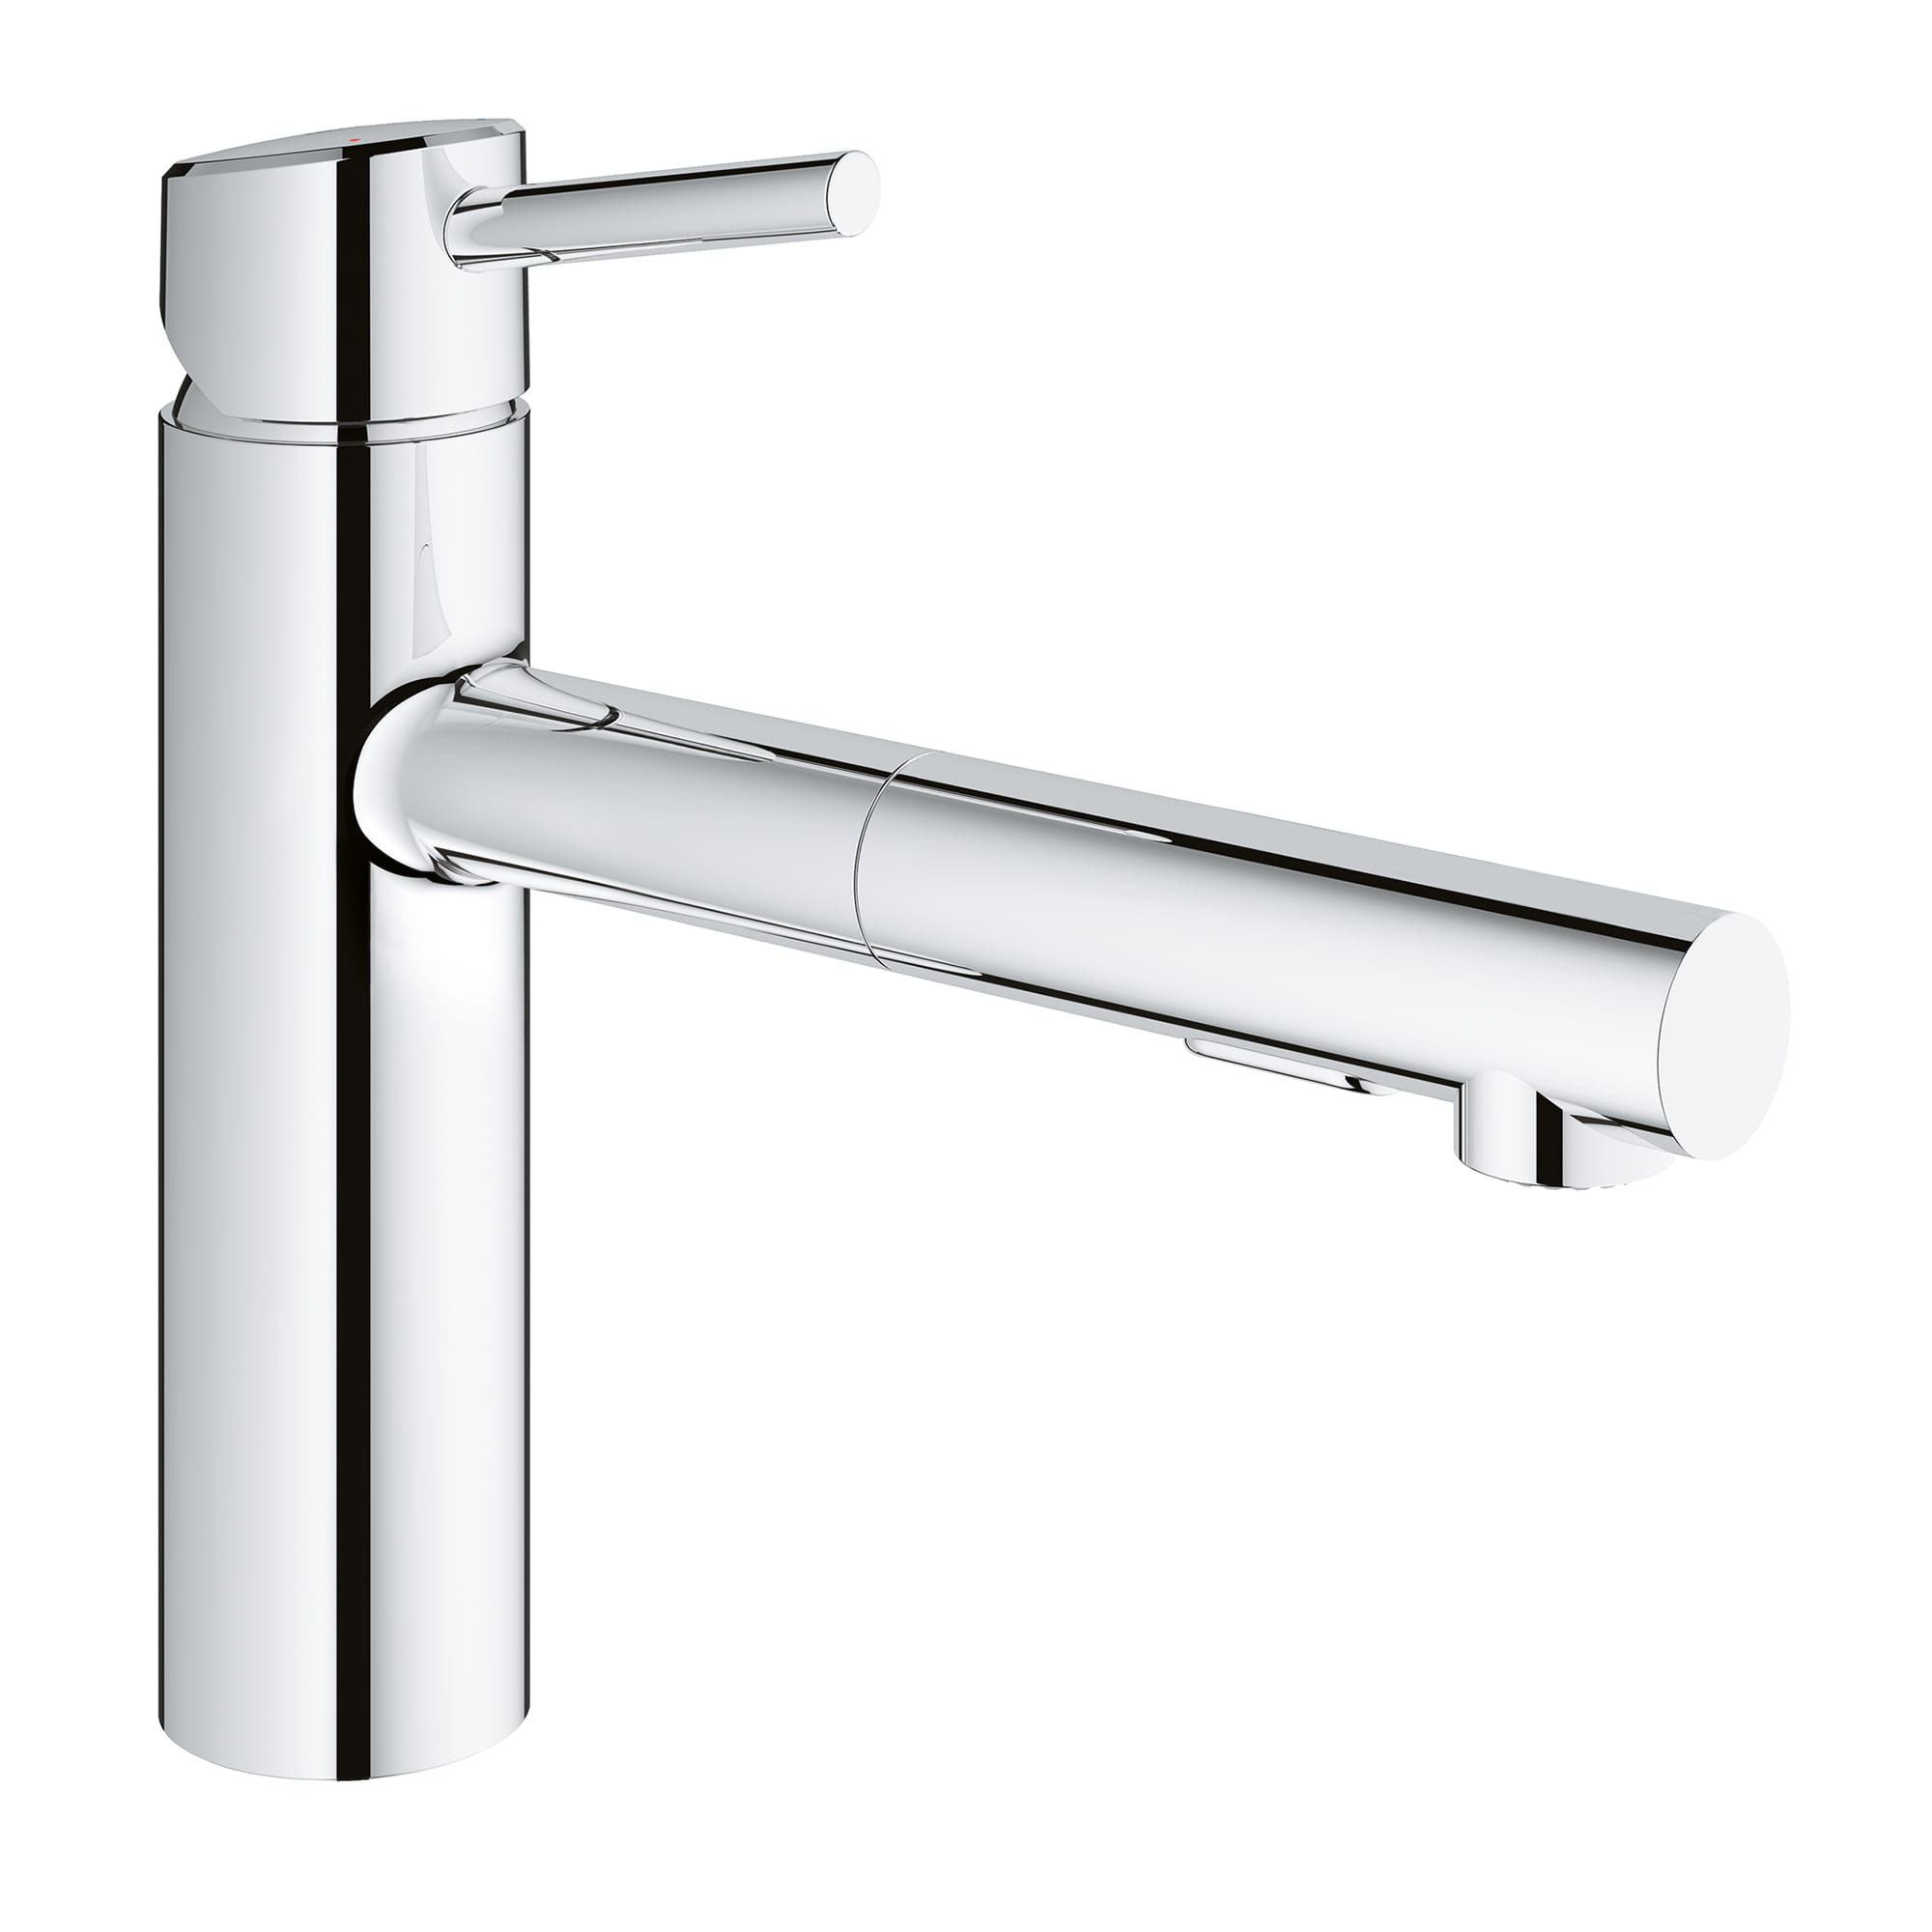 CONCETTO SINGLE-HANDLE PULL-OUT KITCHEN FAUCET DUAL SPRAY 1.5 GPM Model: 31453001-related